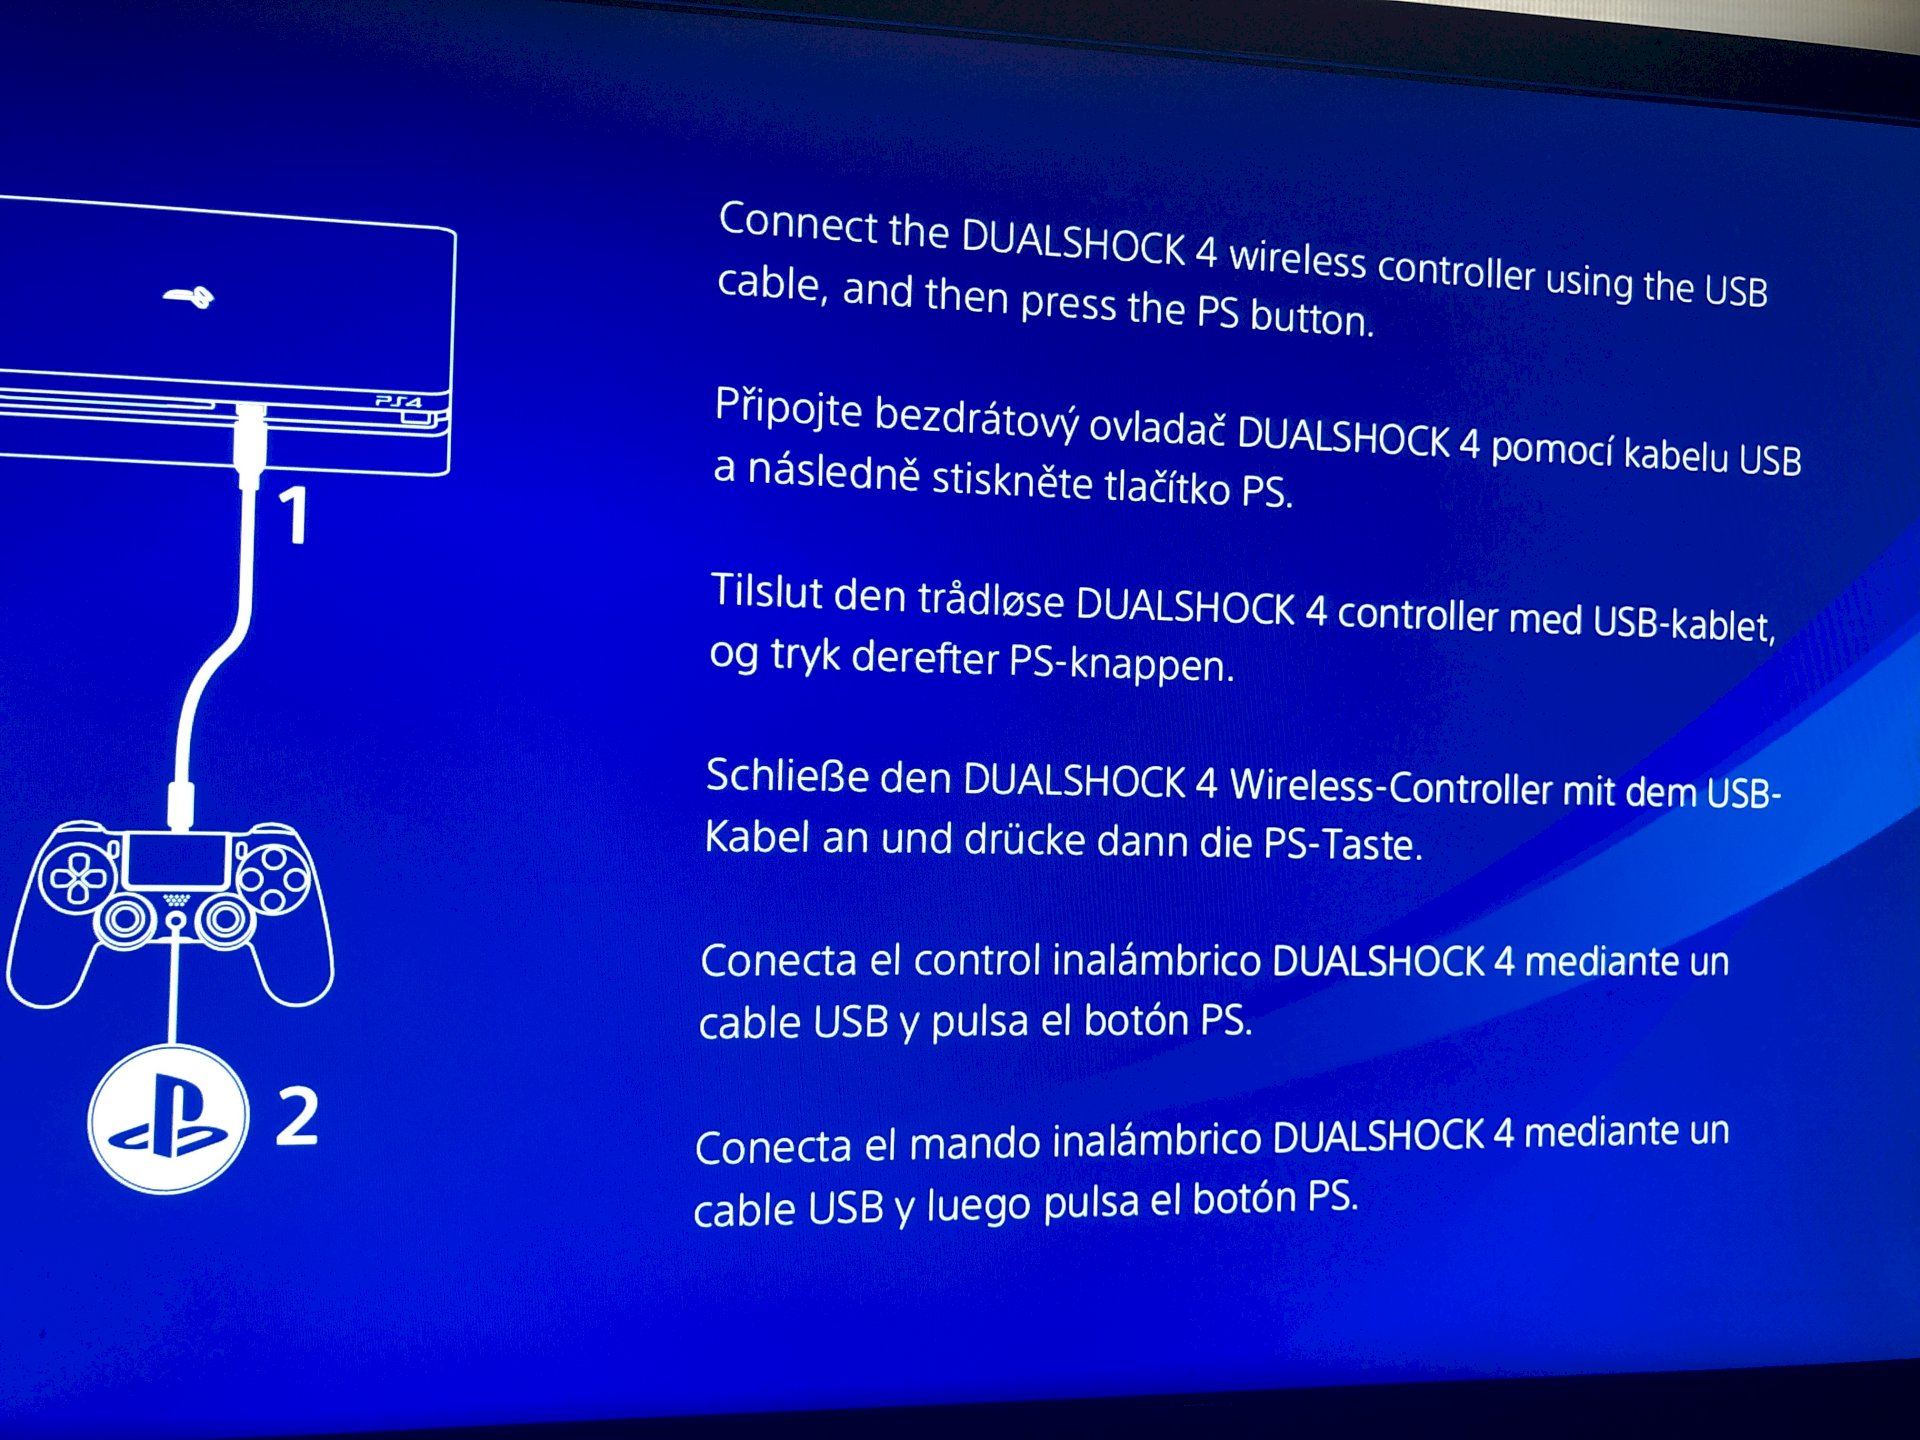 connect the dualshock 4 using usb cable